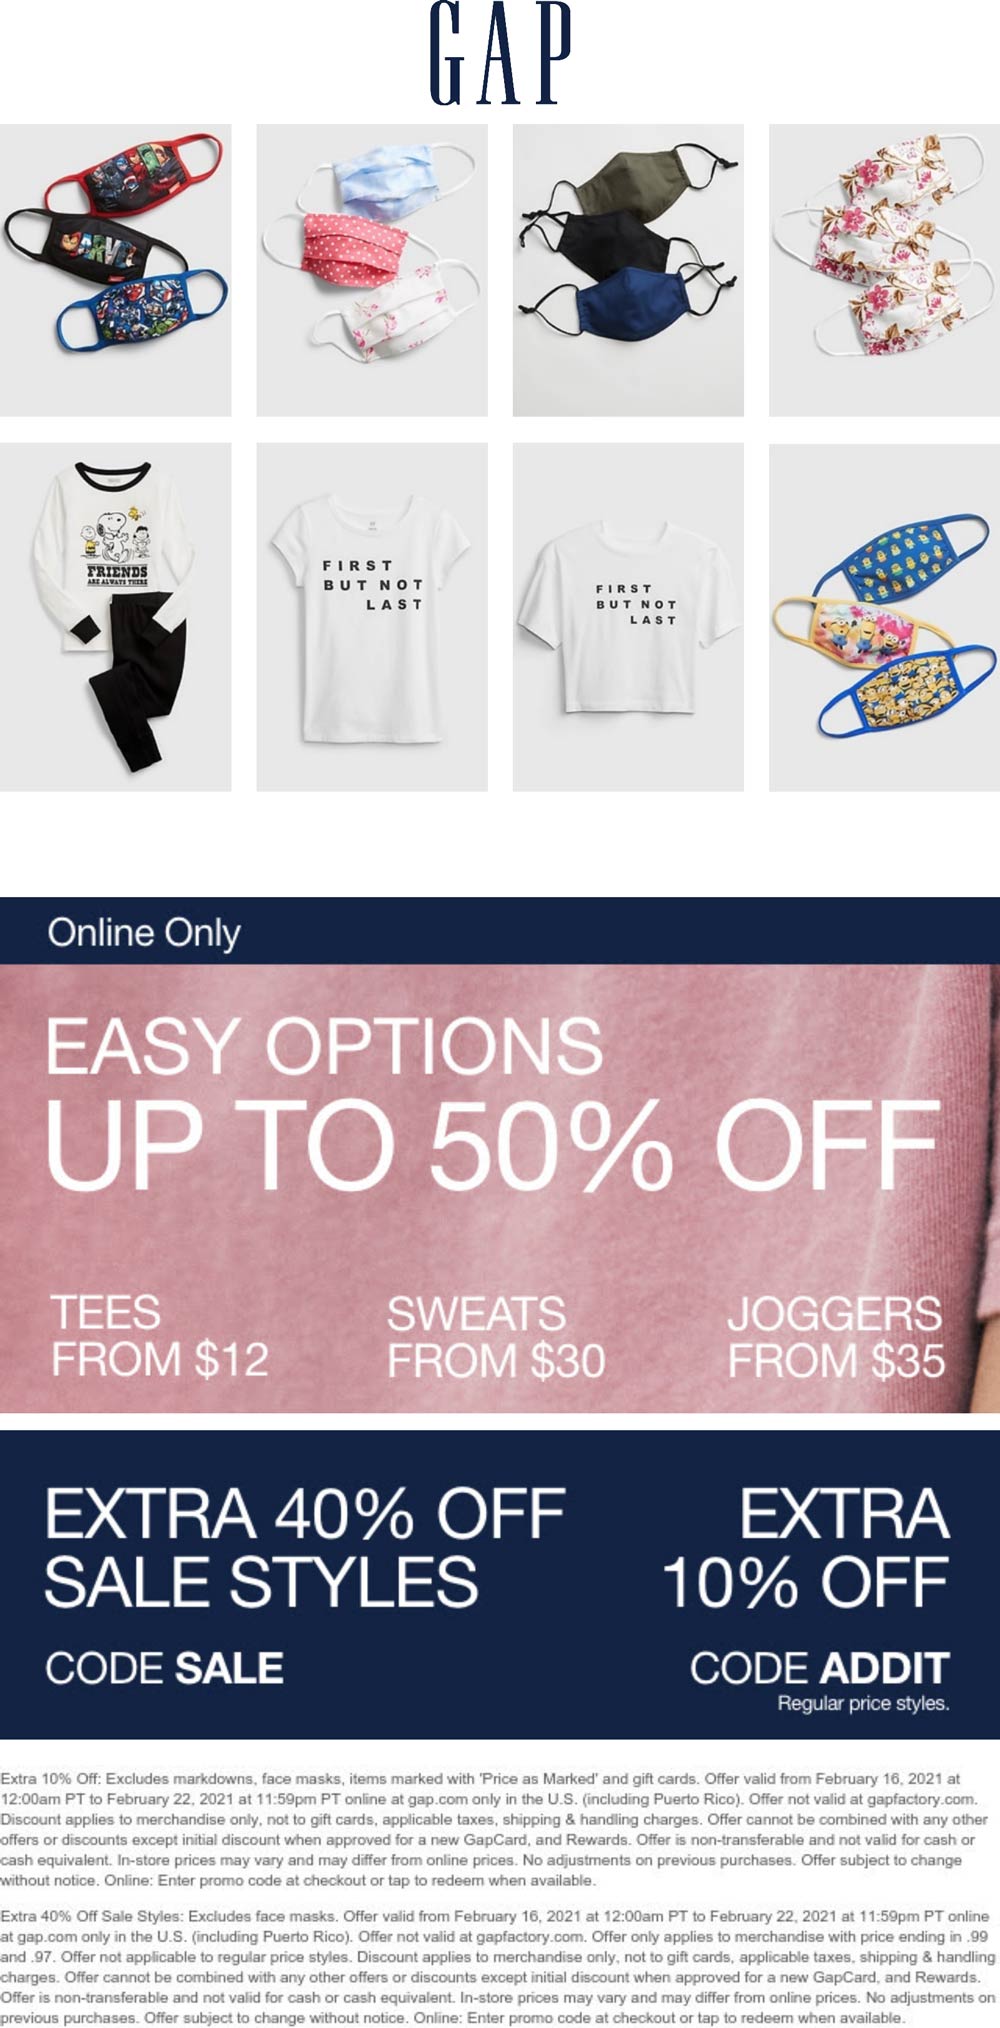 Gap stores Coupon  Extra 40-50% off sale styles online at Gap via promo code SALE and ADDIT #gap 